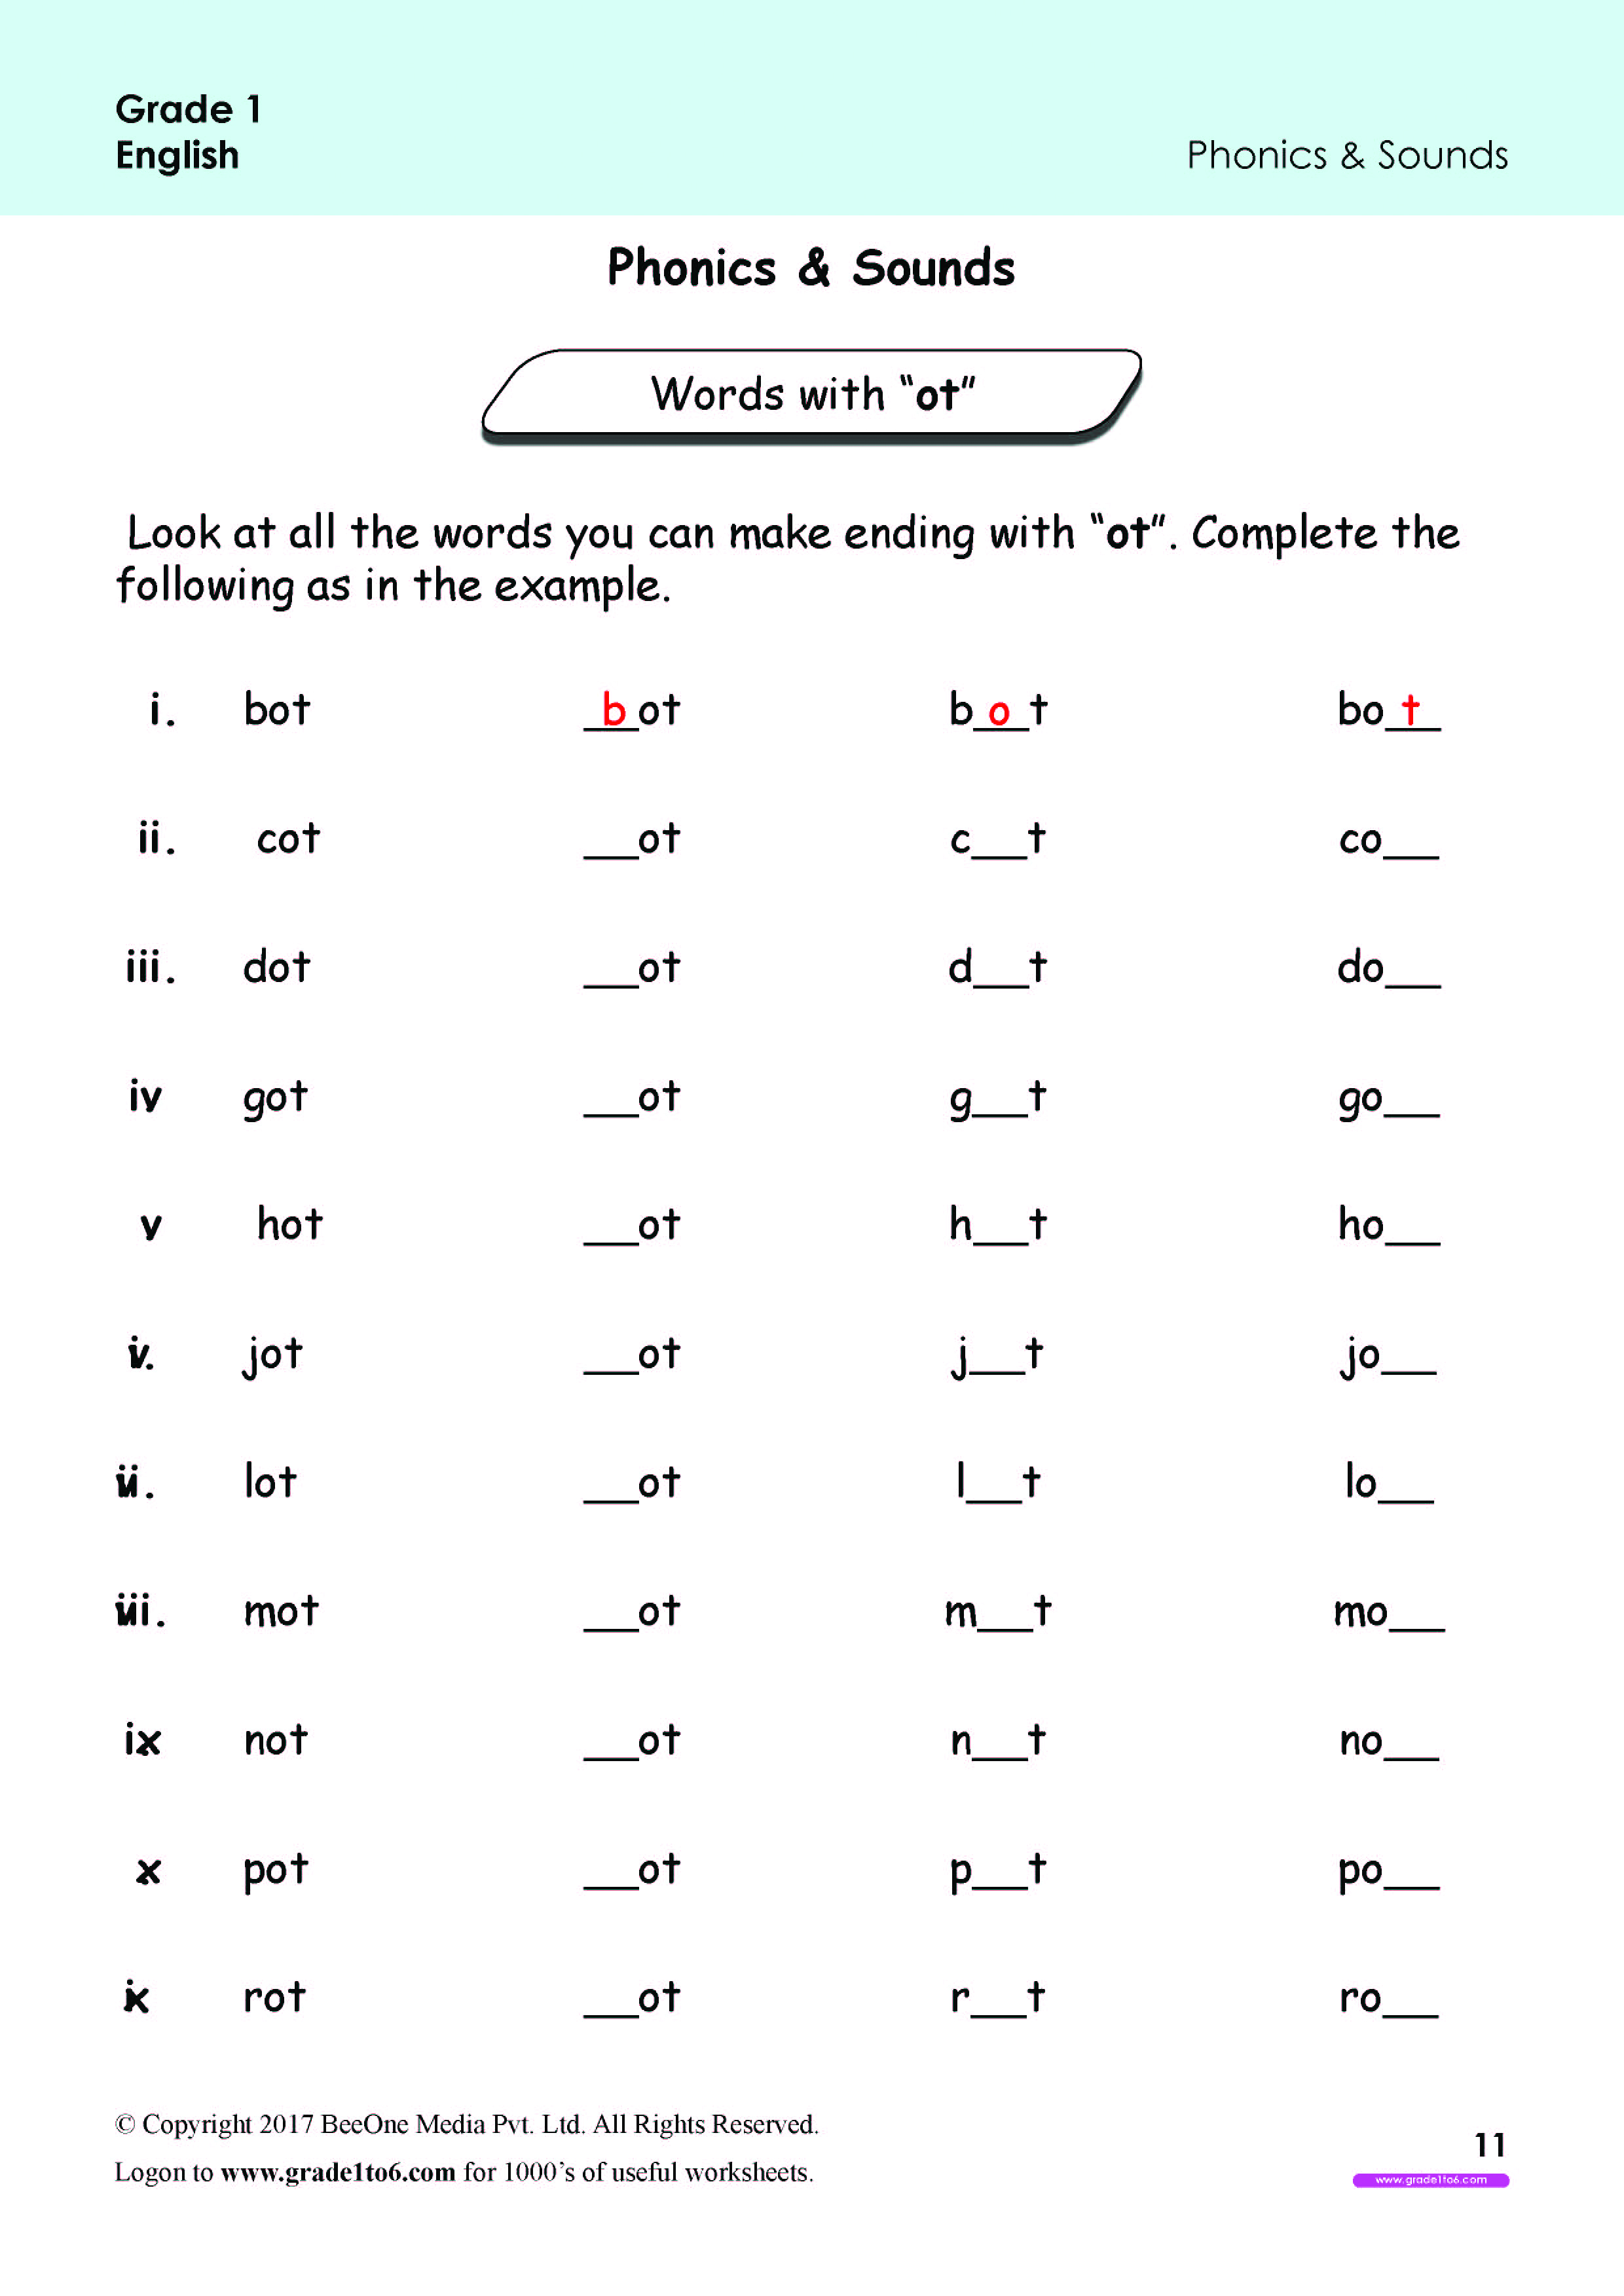 phonics-at-word-family-worksheets-www-grade1to6